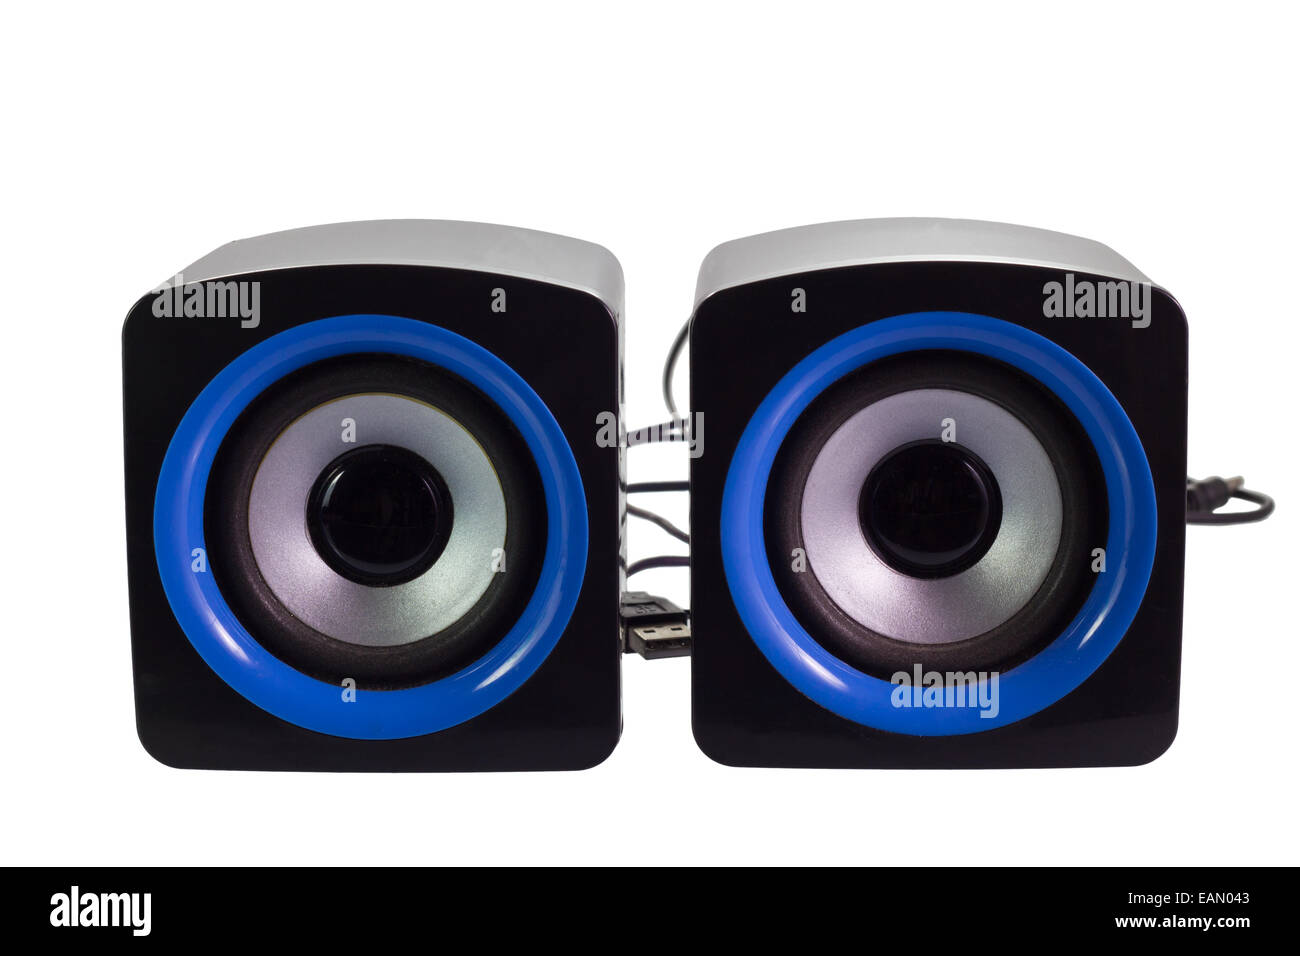 PC computer speakers with blue and black design on isolate white background  Stock Photo - Alamy